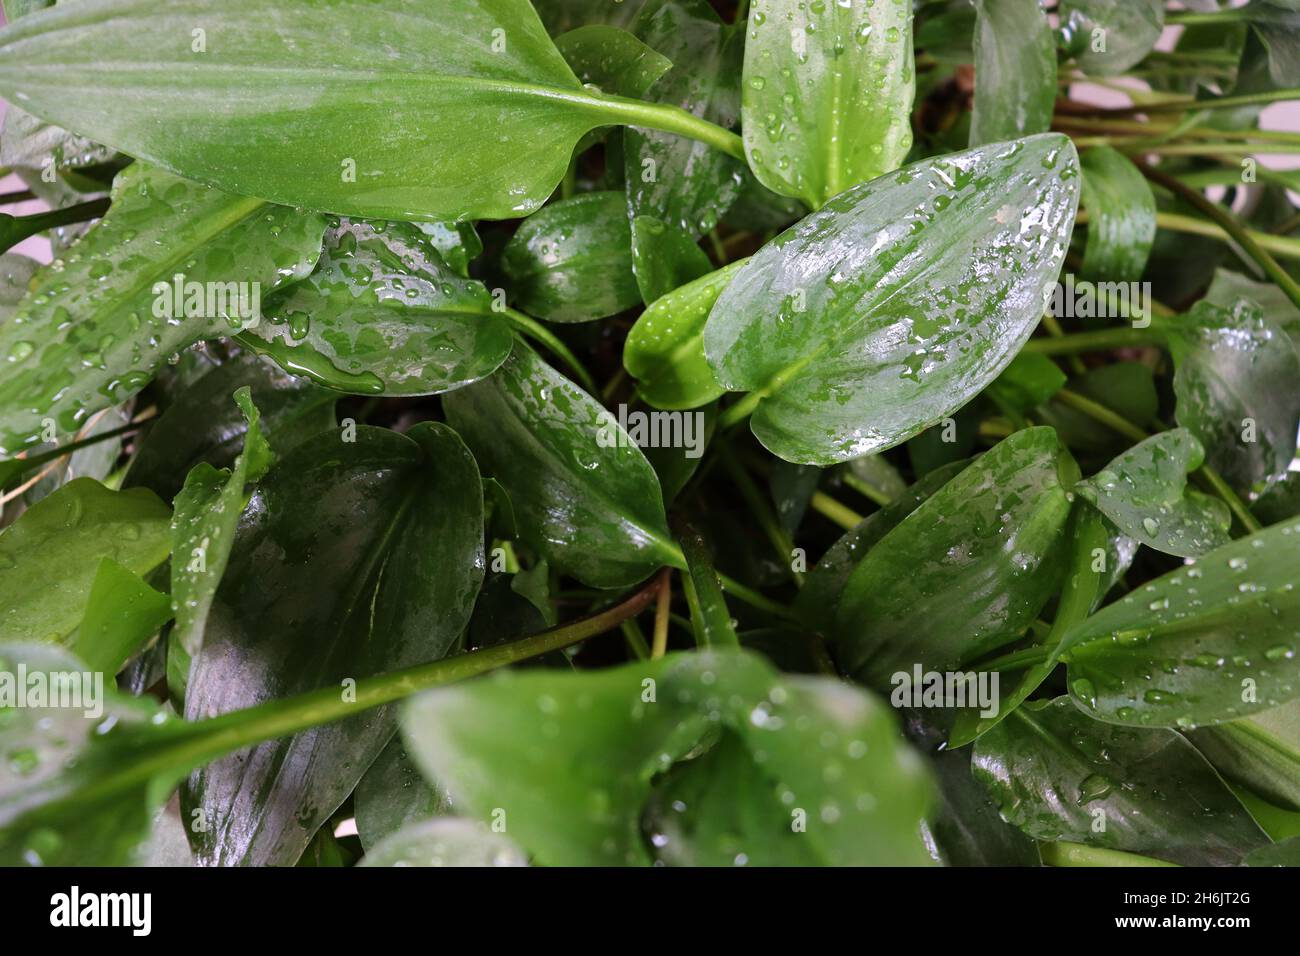 Close up of green leaves of a plant (Drimiopsis maculata, Little white soldiers, African hosta) after being watered. Stock Photo